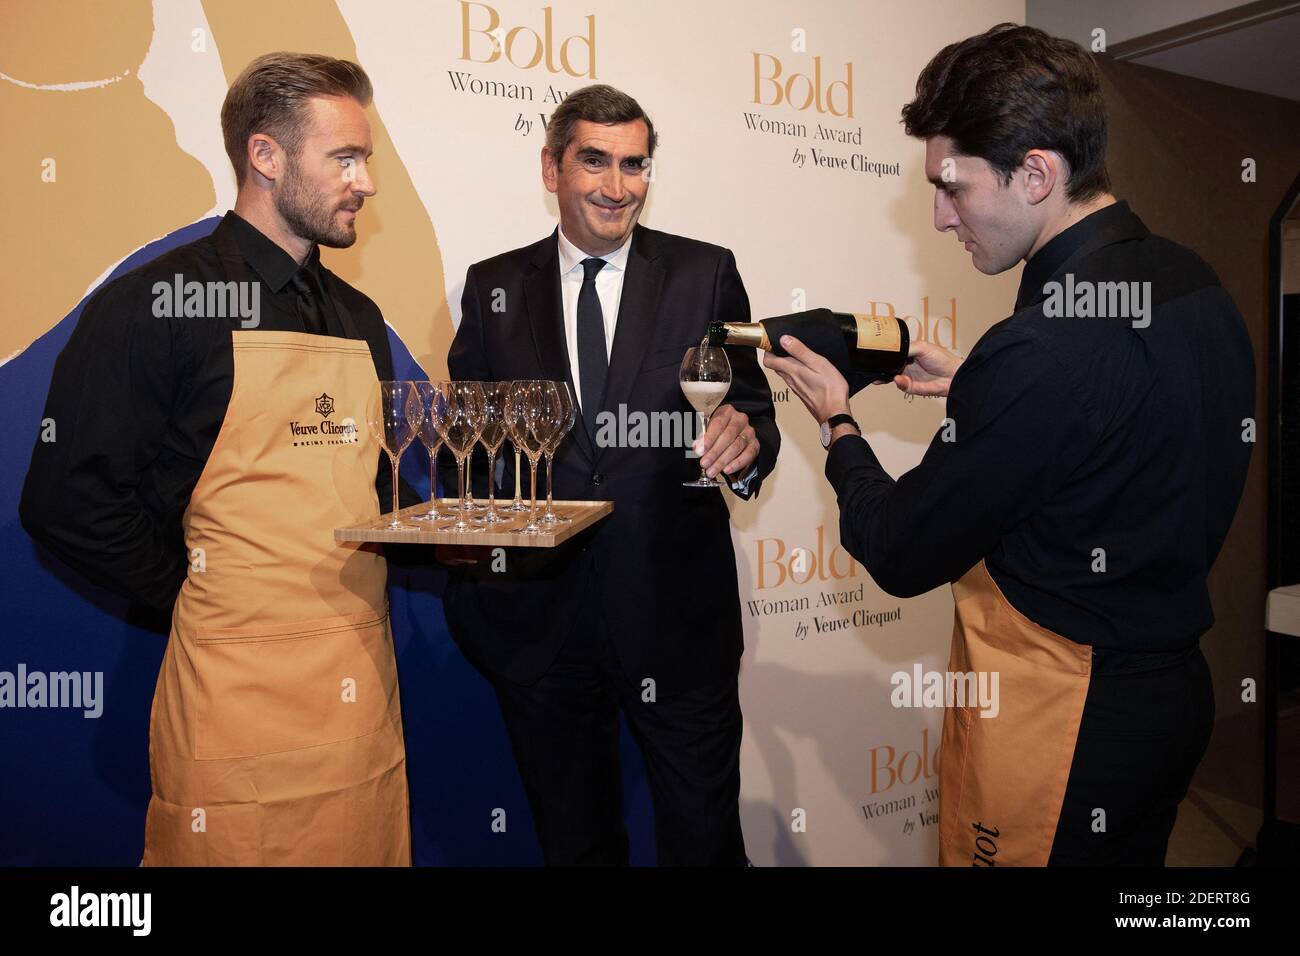 Jean-Marc Gallot, President of the house Veuve Clicquot attends the Bold  Woman Award by Veuve